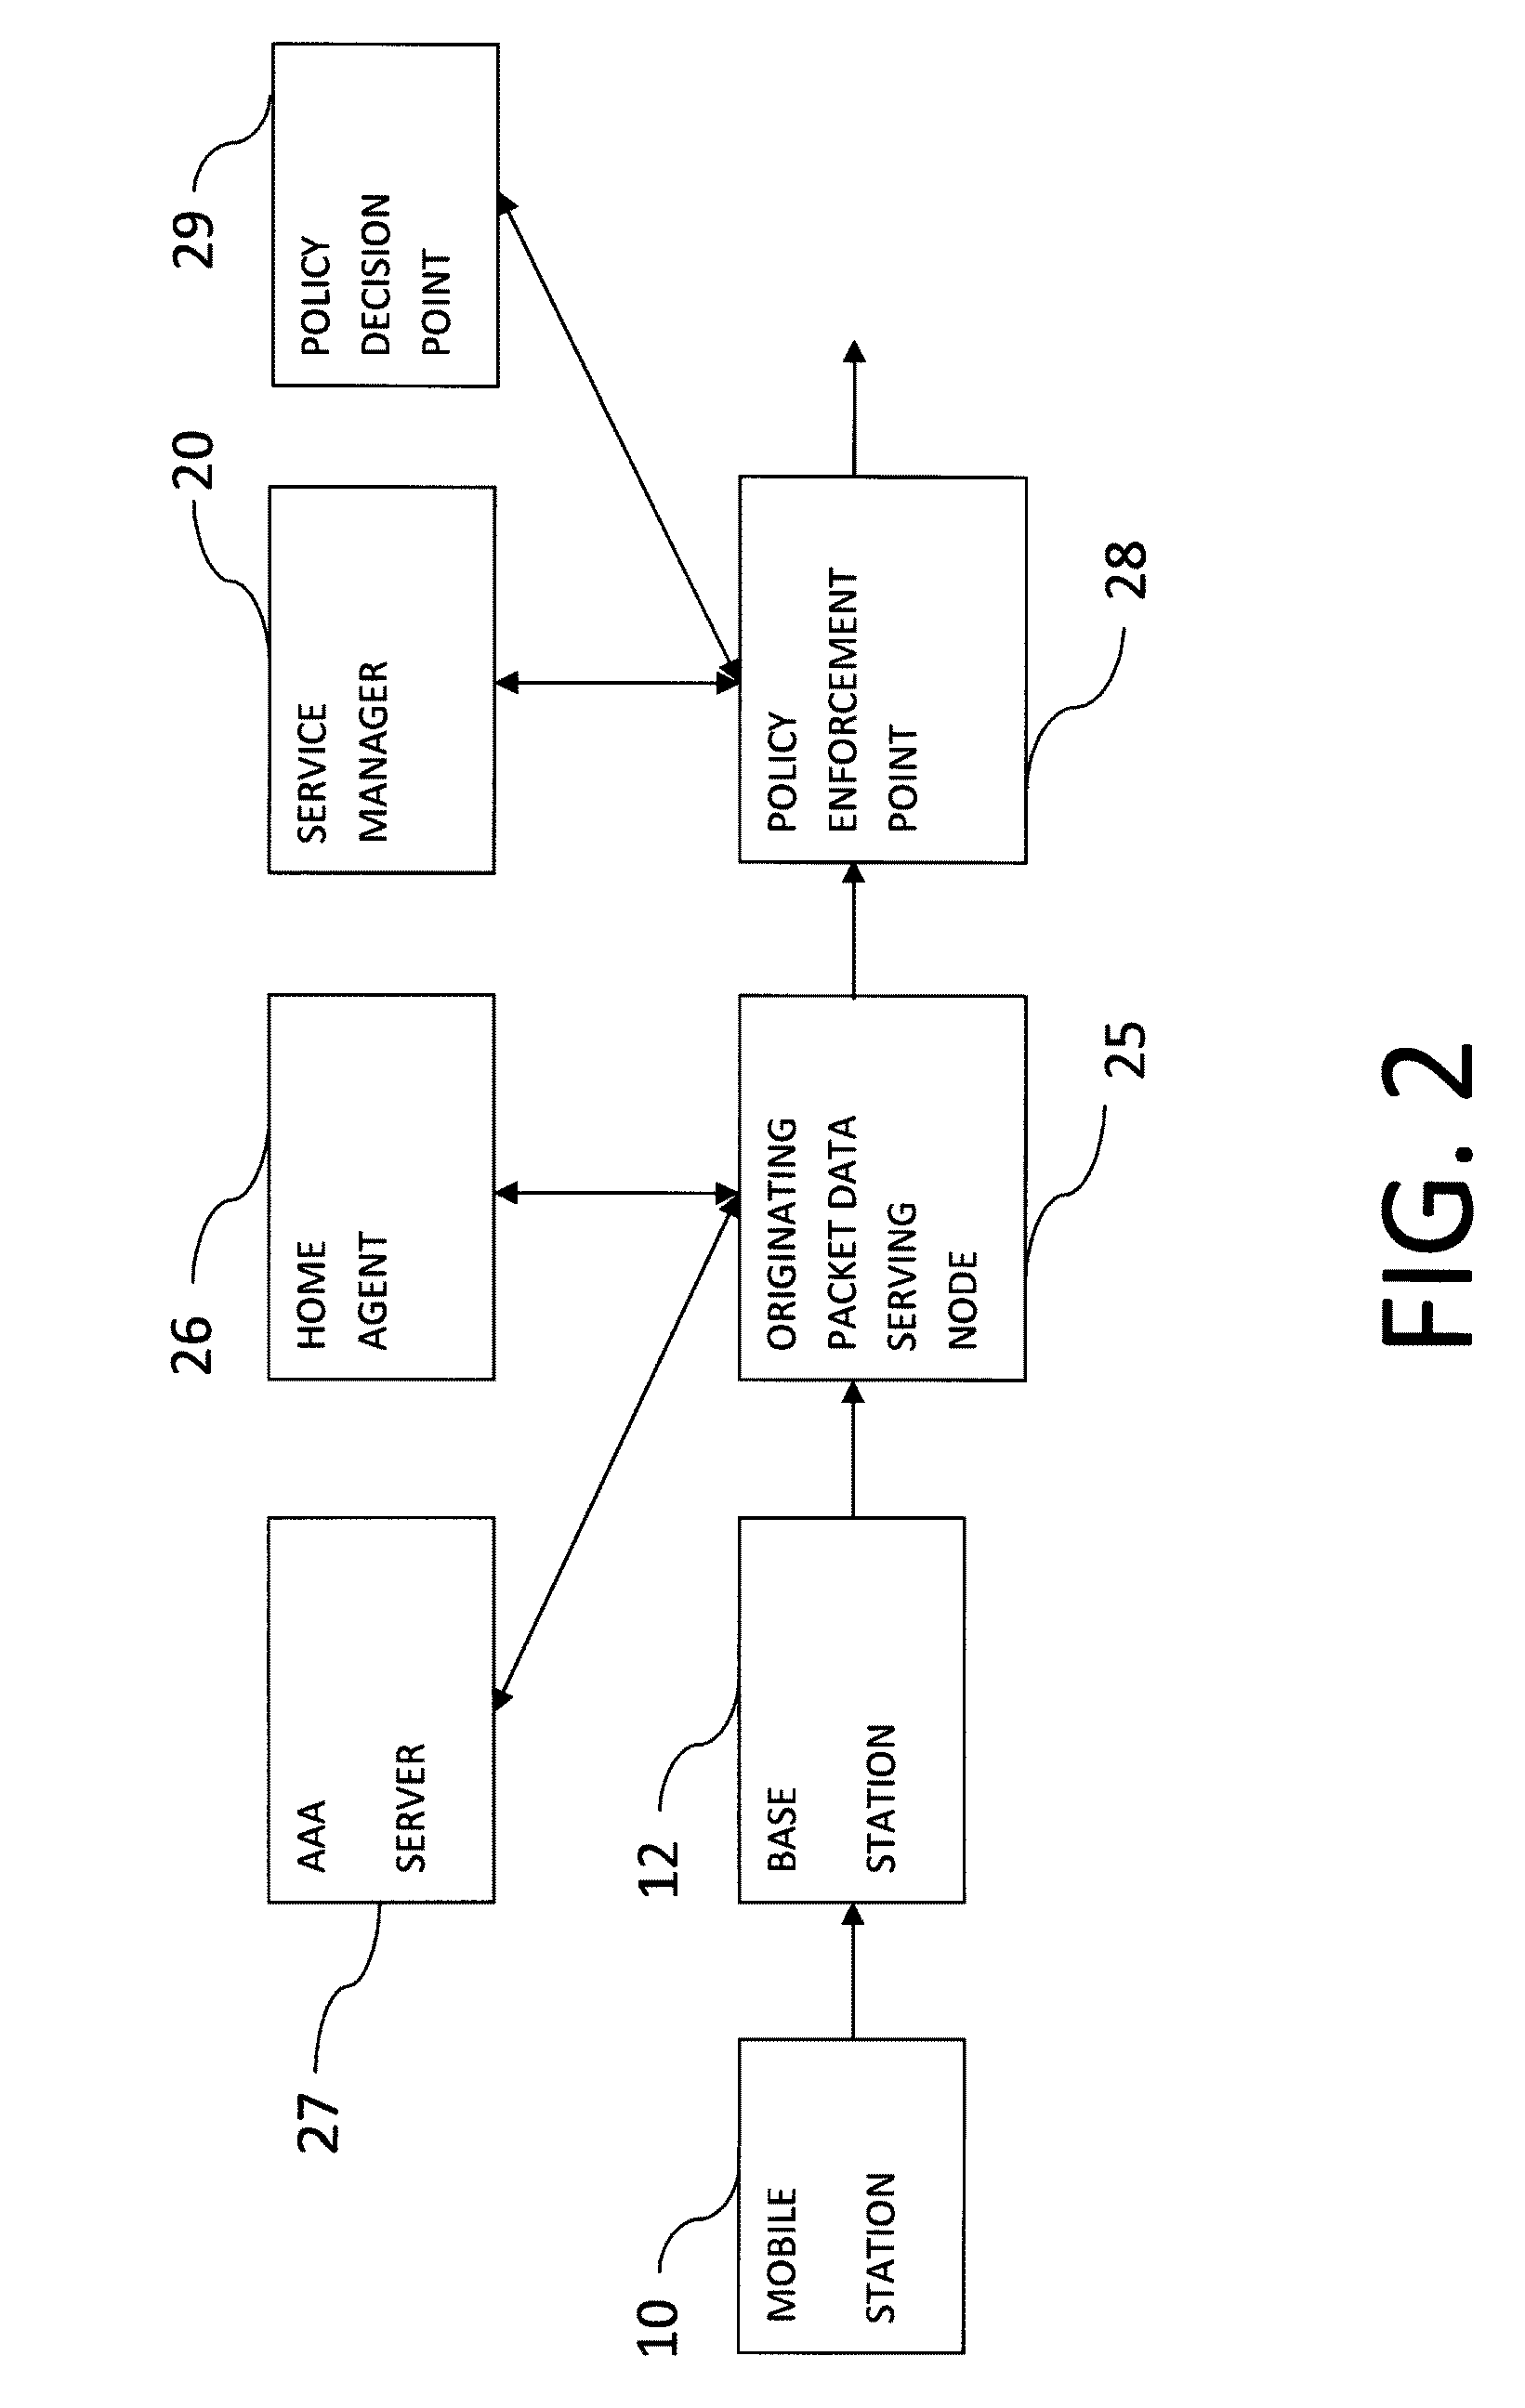 Feature management of a communication device